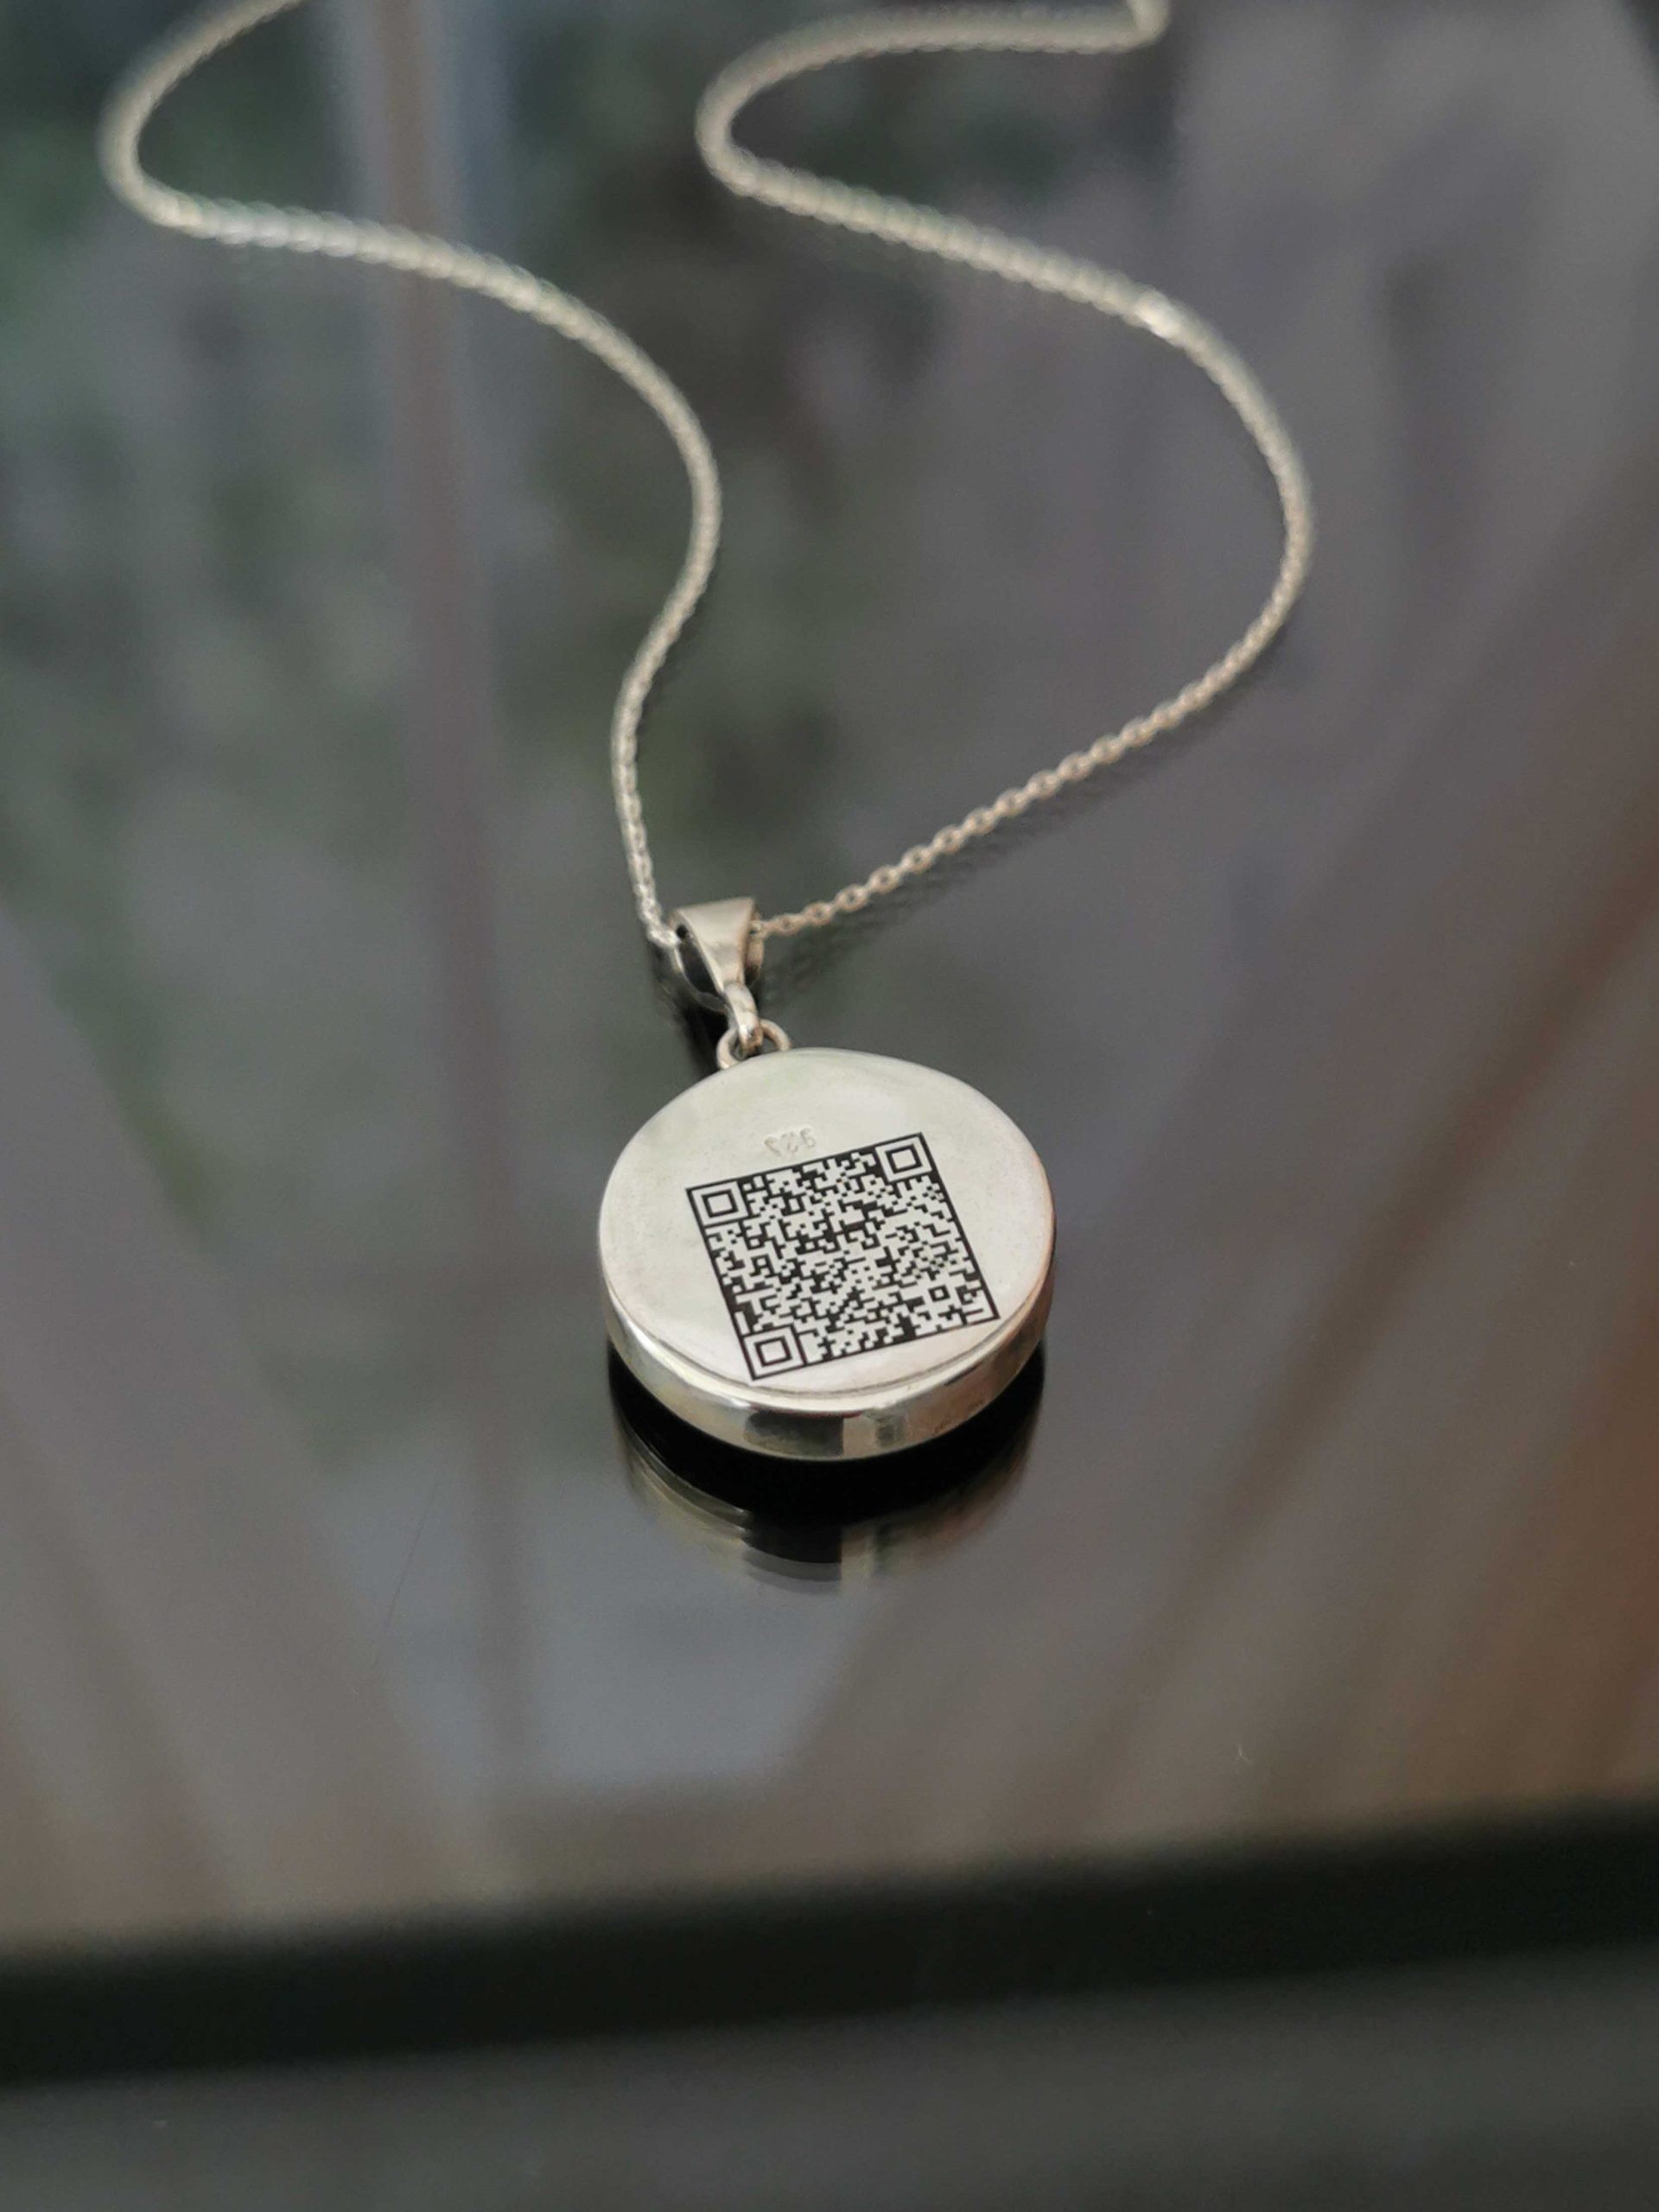 ROVERTAGS QR Code Dog Tags Personalized for Pets - Engraved Pet ID with  Online Profile - Sends Pet Location When Scanning : Amazon.in: Pet Supplies